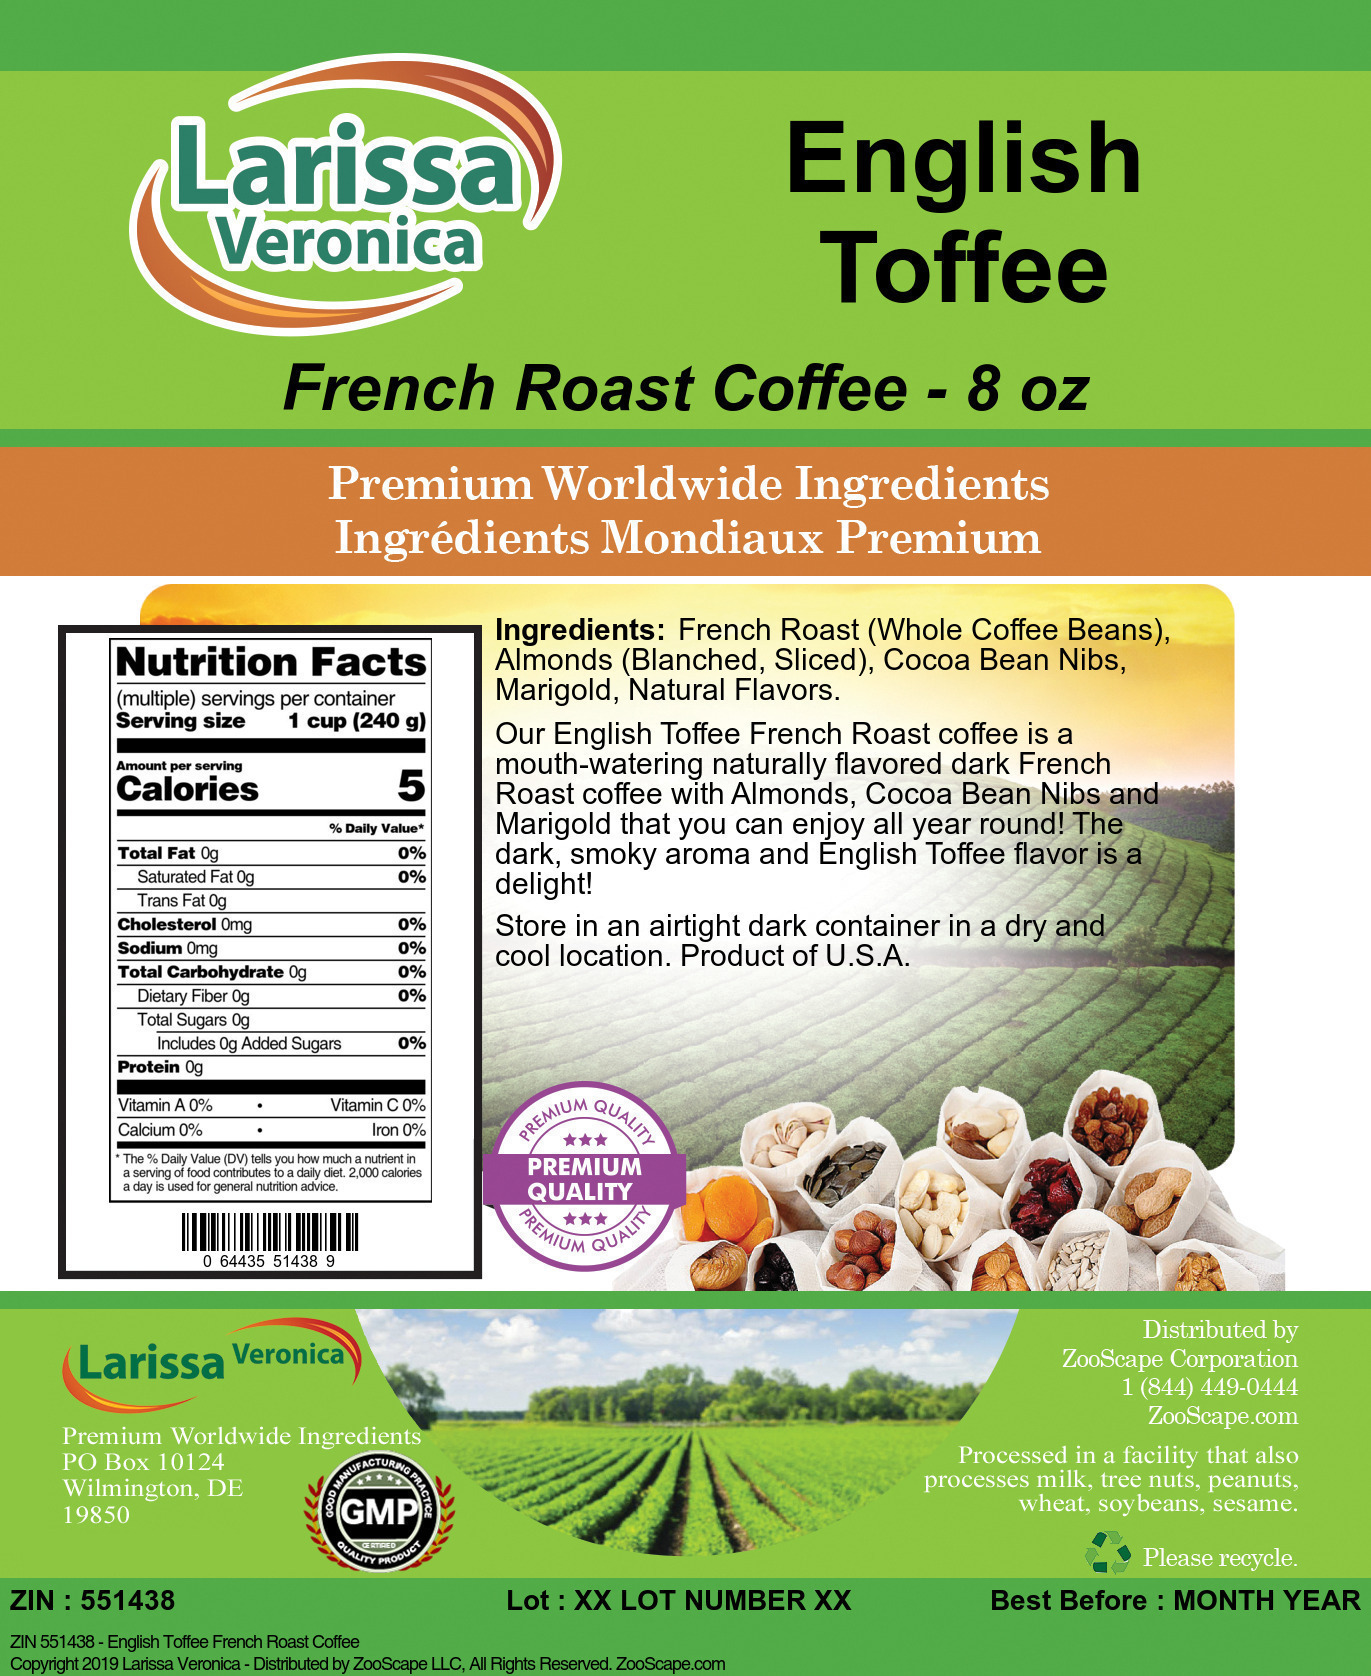 English Toffee French Roast Coffee - Label